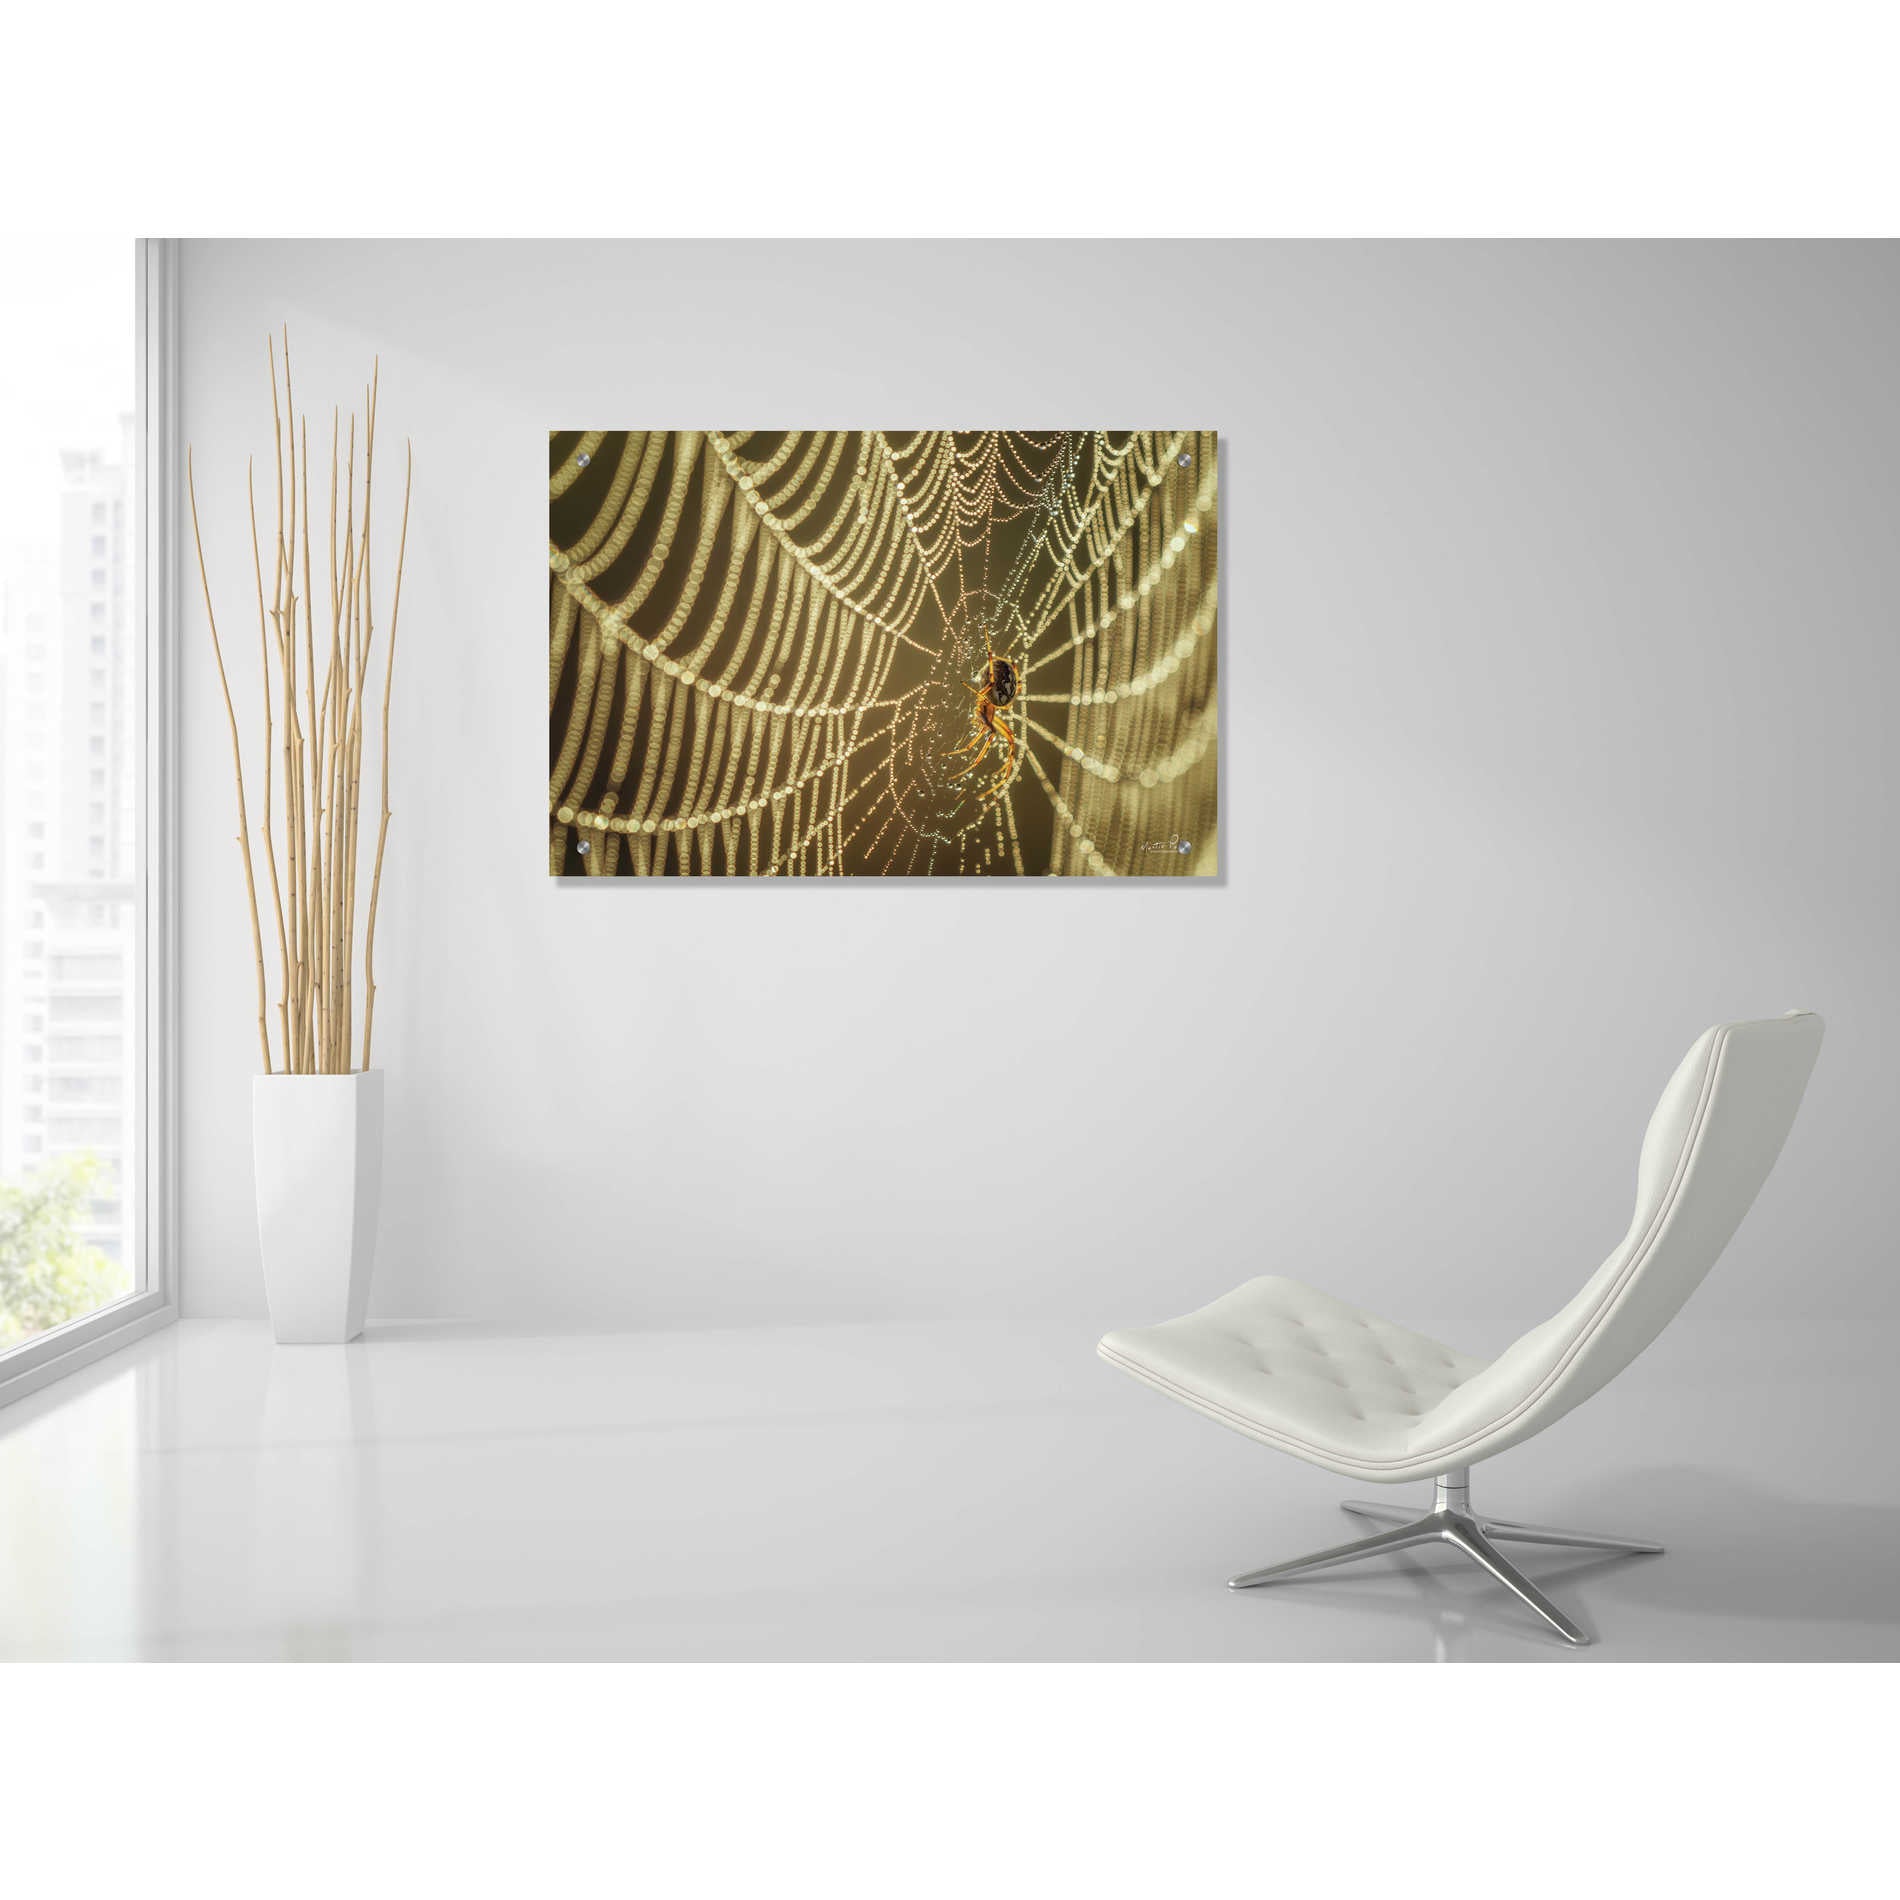 Epic Art 'The Spider and Her Jewels' by Martin Podt, Acrylic Glass Wall Art,36x24